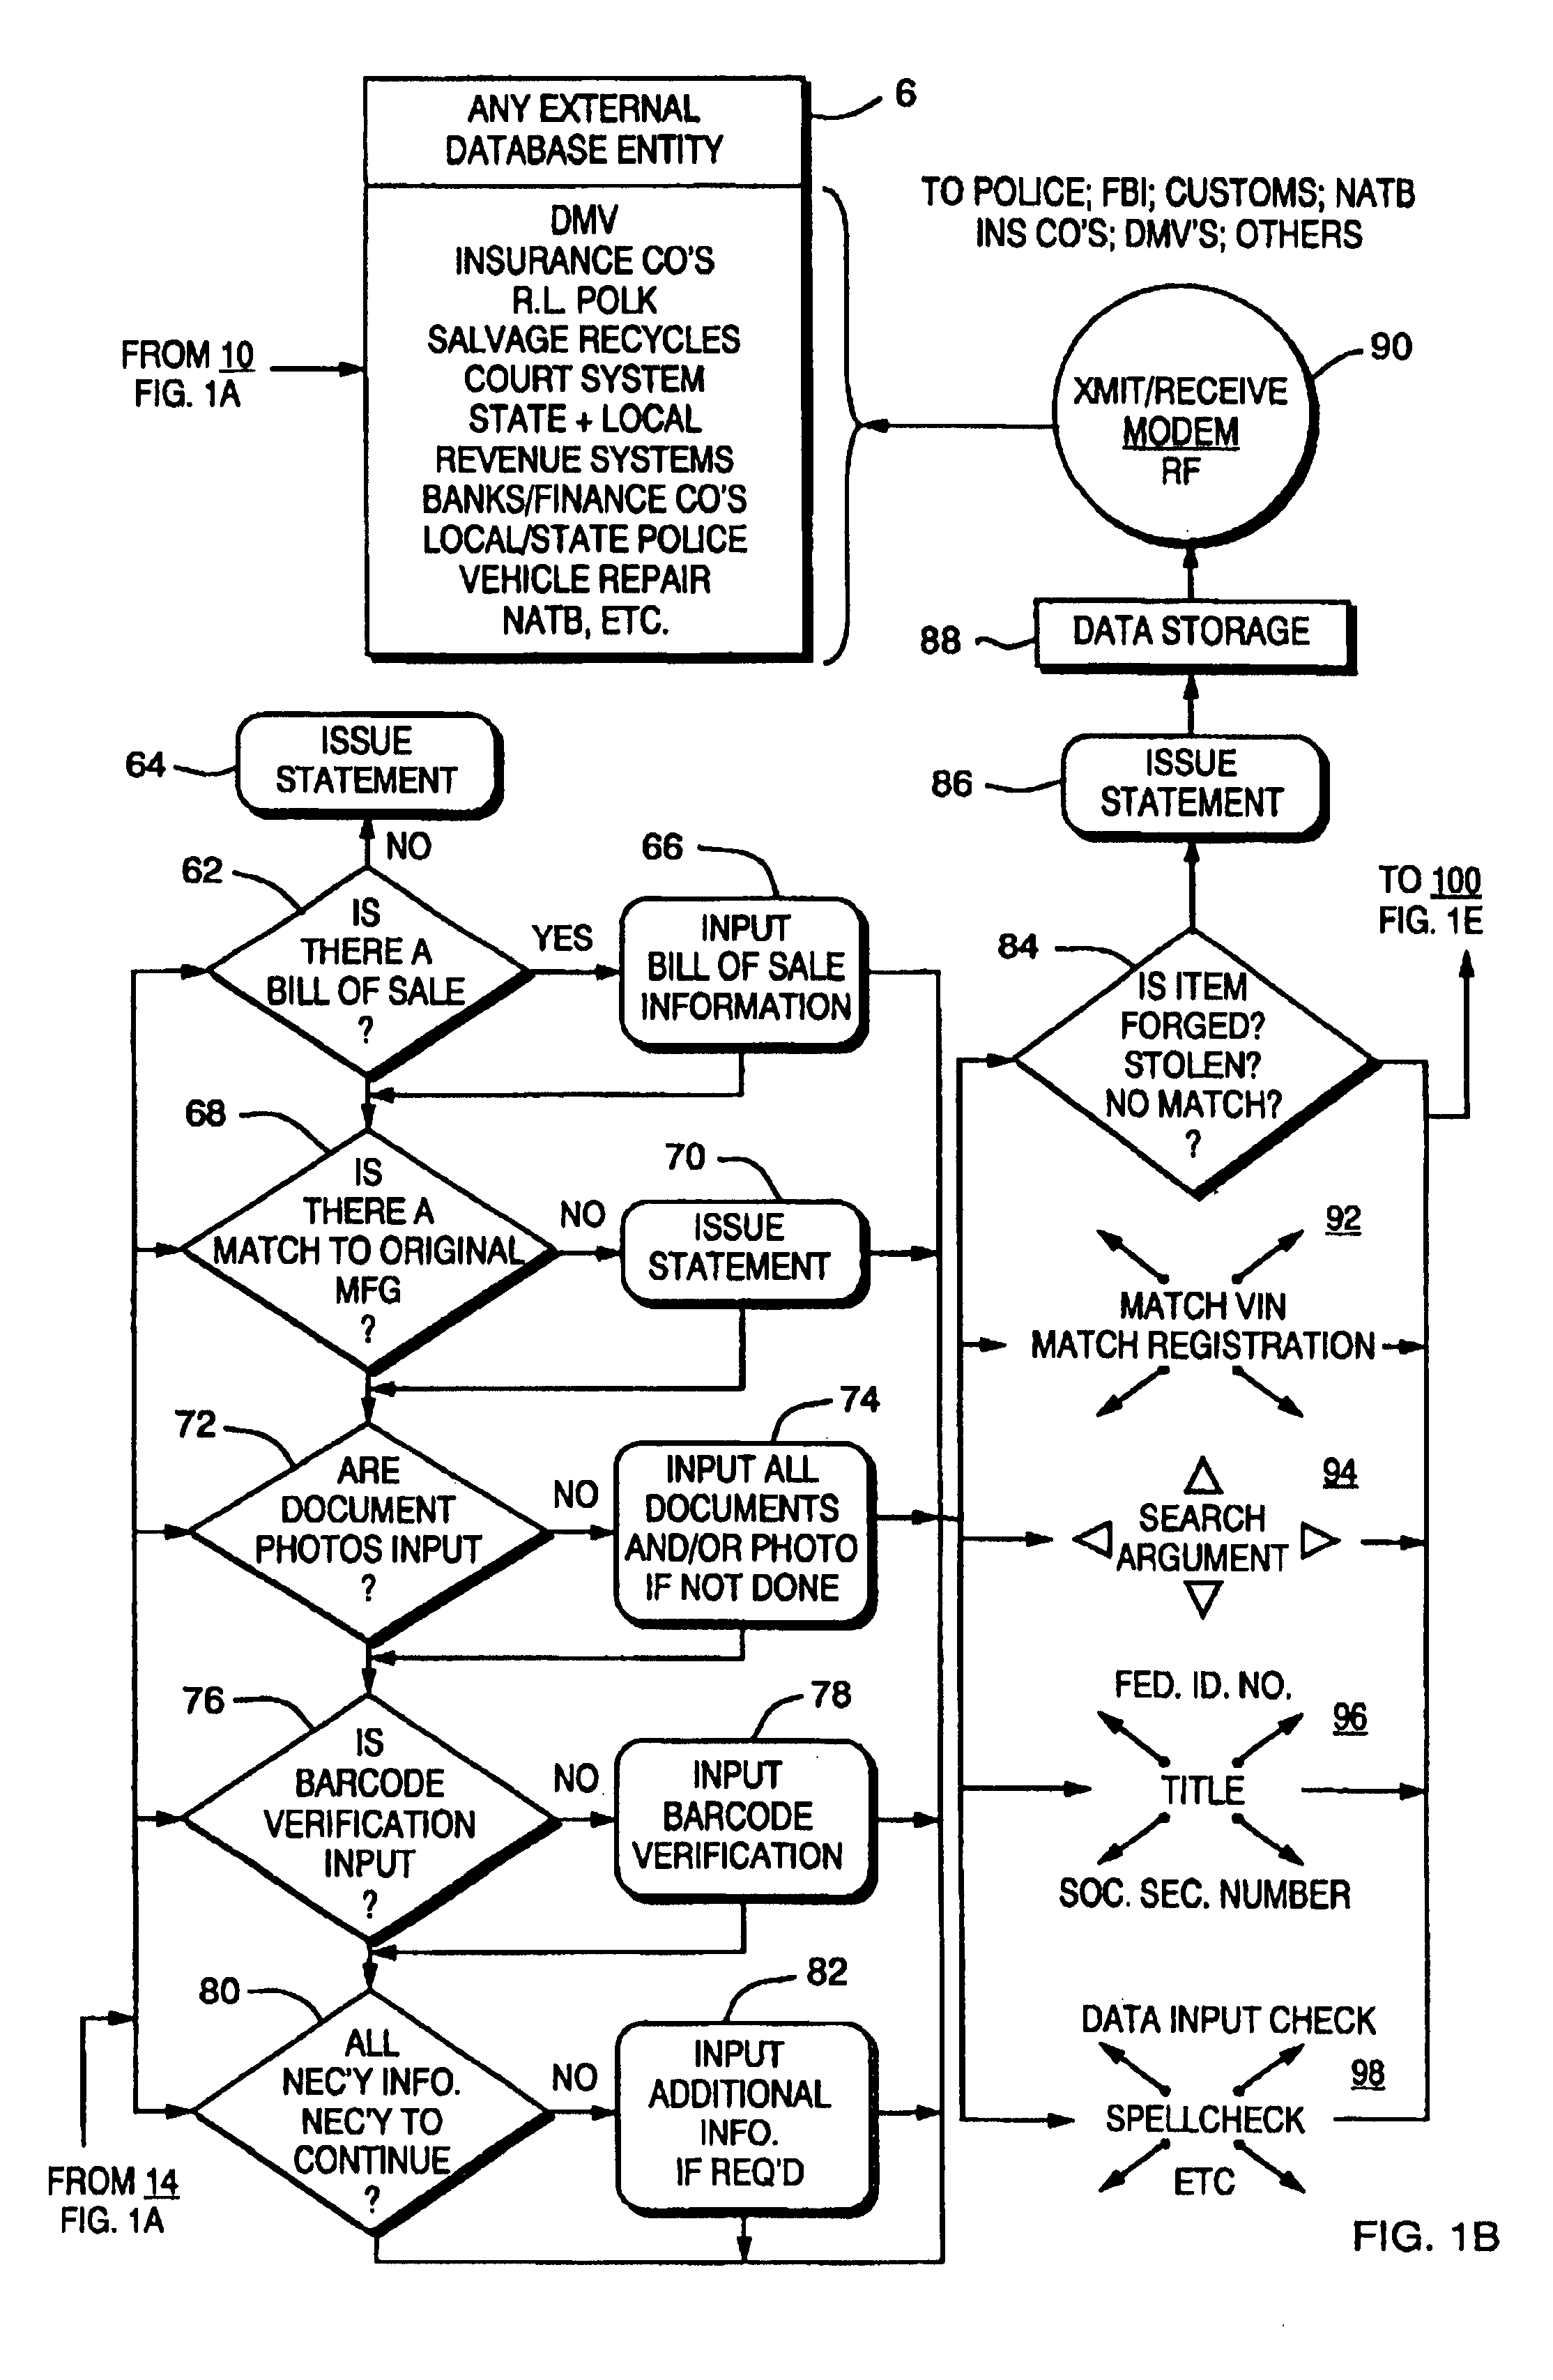 Uniform system for verifying and tracking the title of articles or objects of value